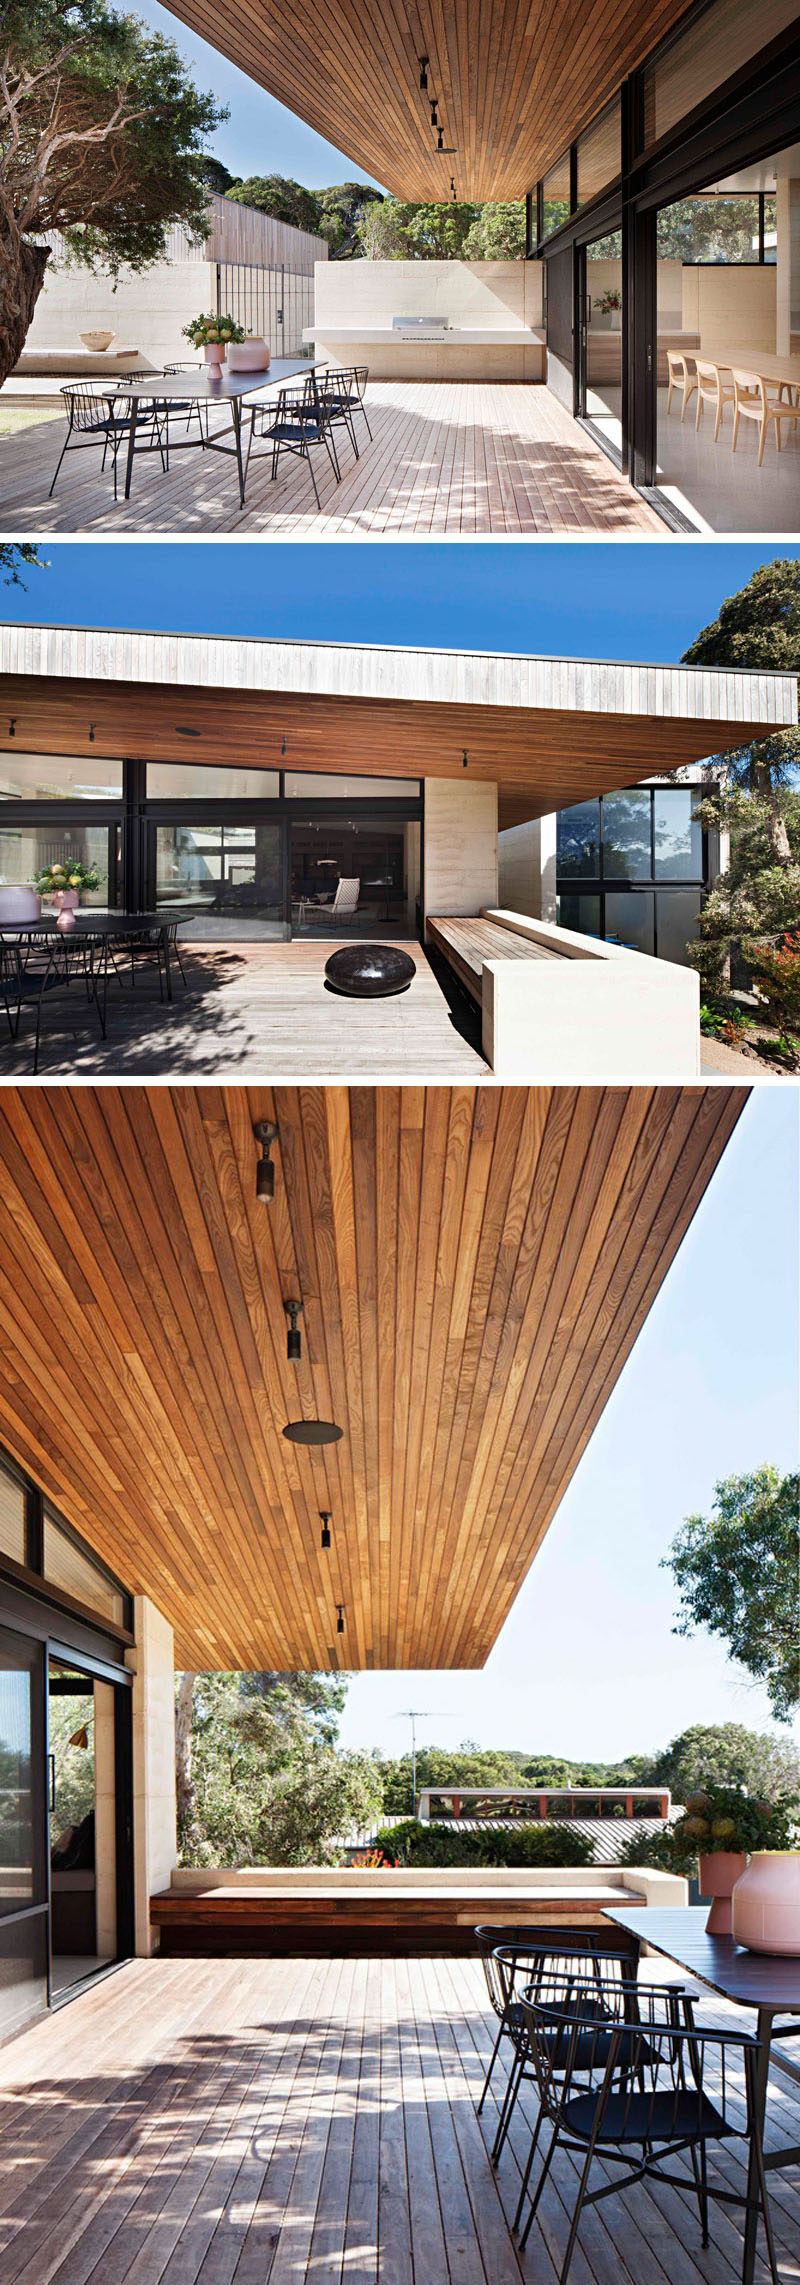 This modern Australian house has a large partially covered outdoor terrace. Wood has been used for the flooring and the ceiling, while built-in elements like an outdoor bbq area and bench seating have been added.